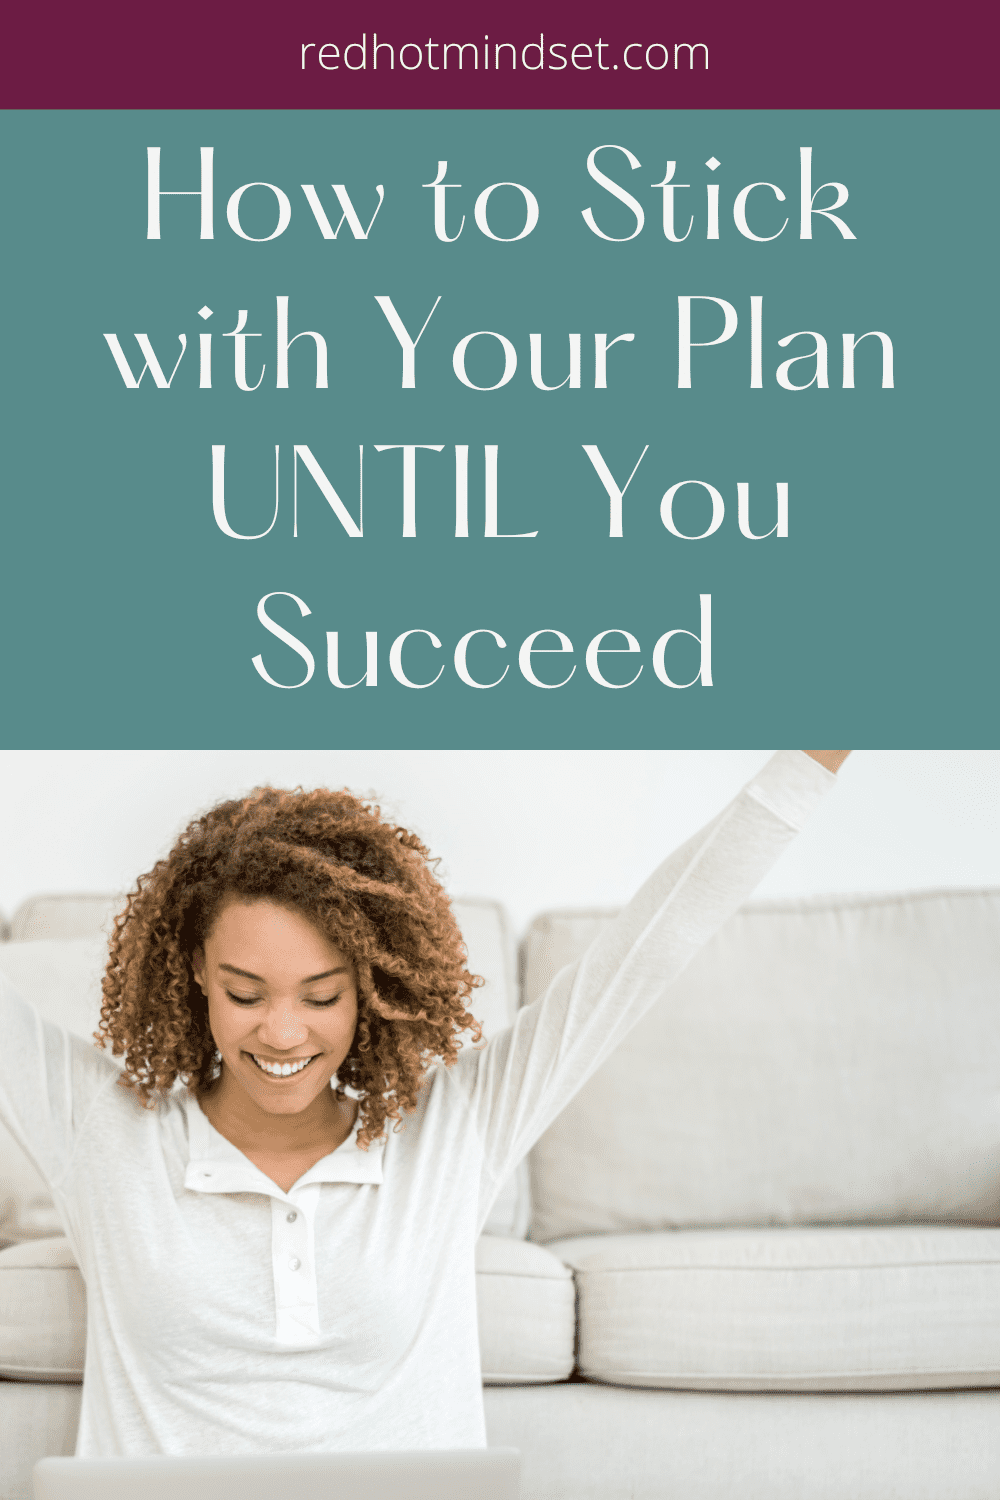 Ep 174 | Pursuing Perseverance – How to Stick with Your Plan UNTIL You Succeed with Gillian Perkins